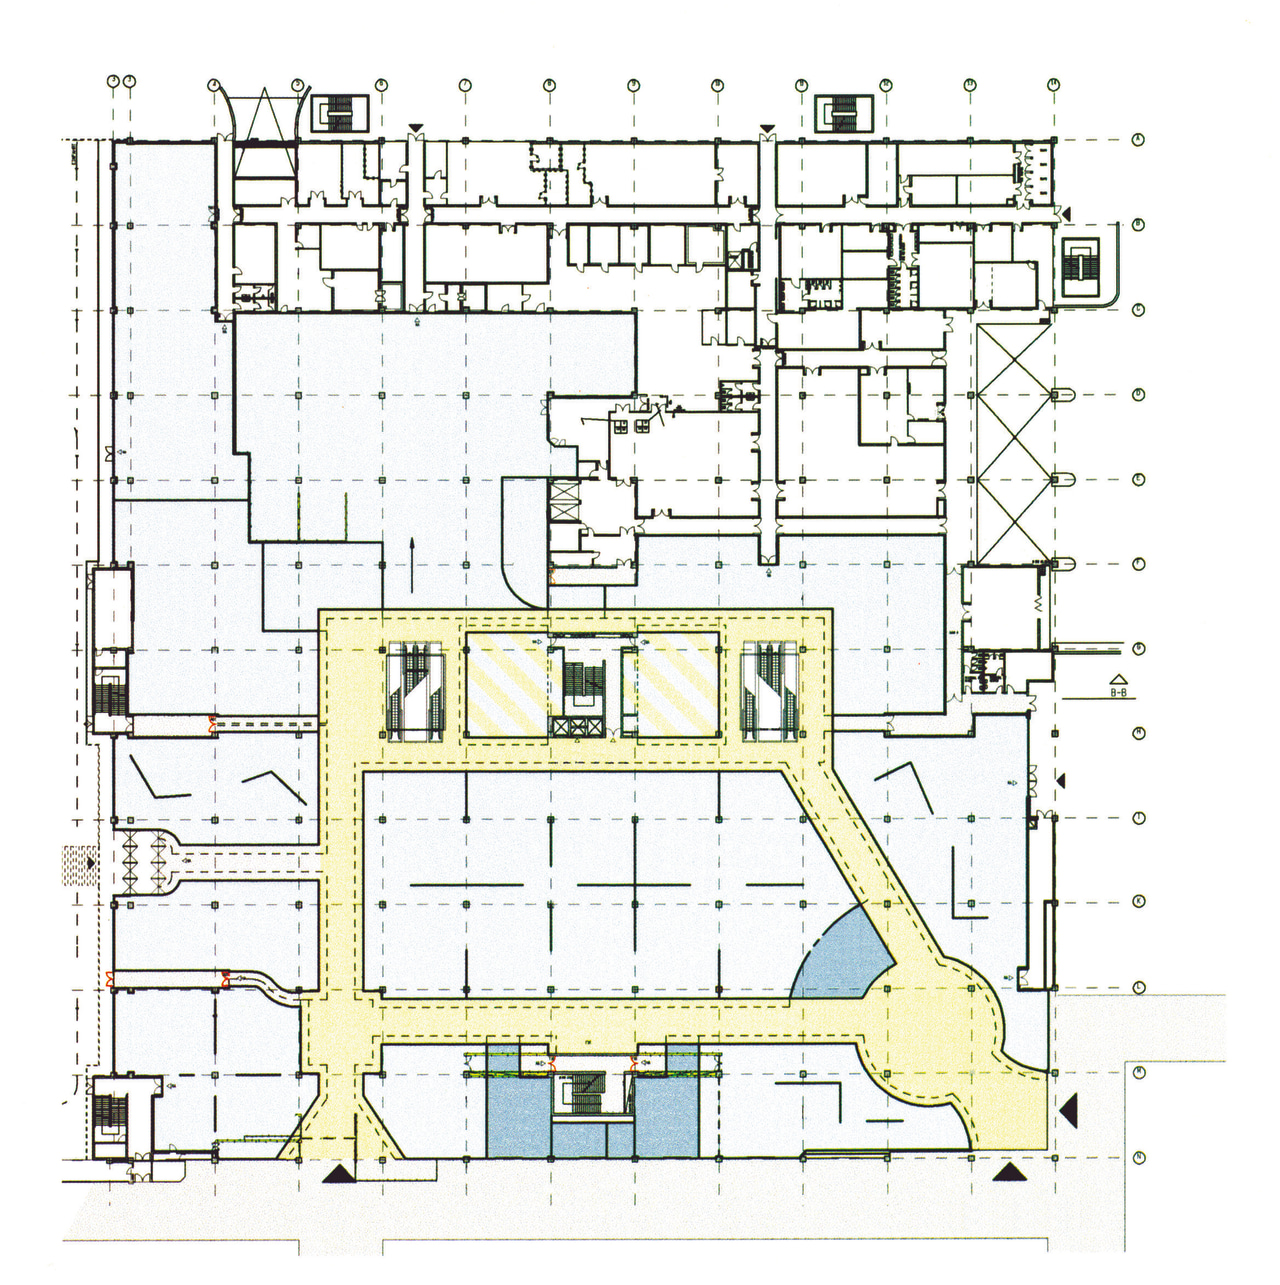 %?%nz2008-50 area, diagram, drawing, floor plan, line, plan, product design, technical drawing, white